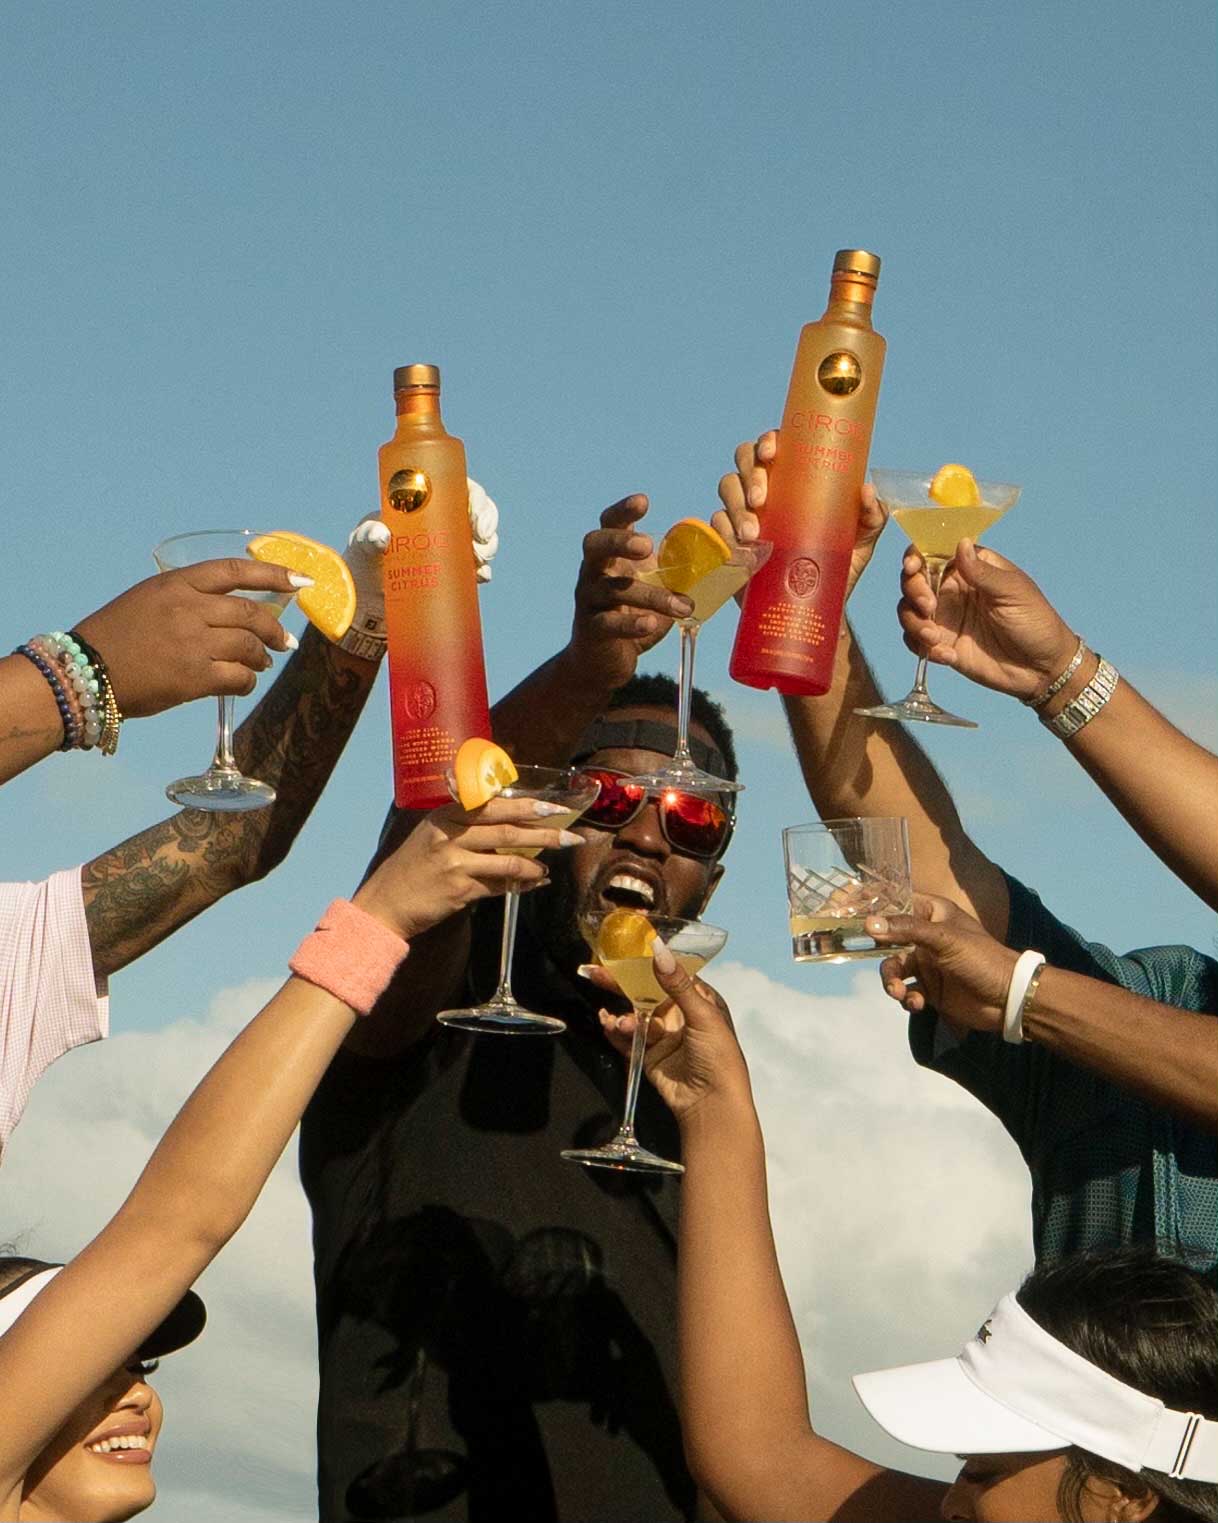 Sean “Diddy” Combs Prepares For Summer with New Limited-Edition CÎROC Summer Citrus